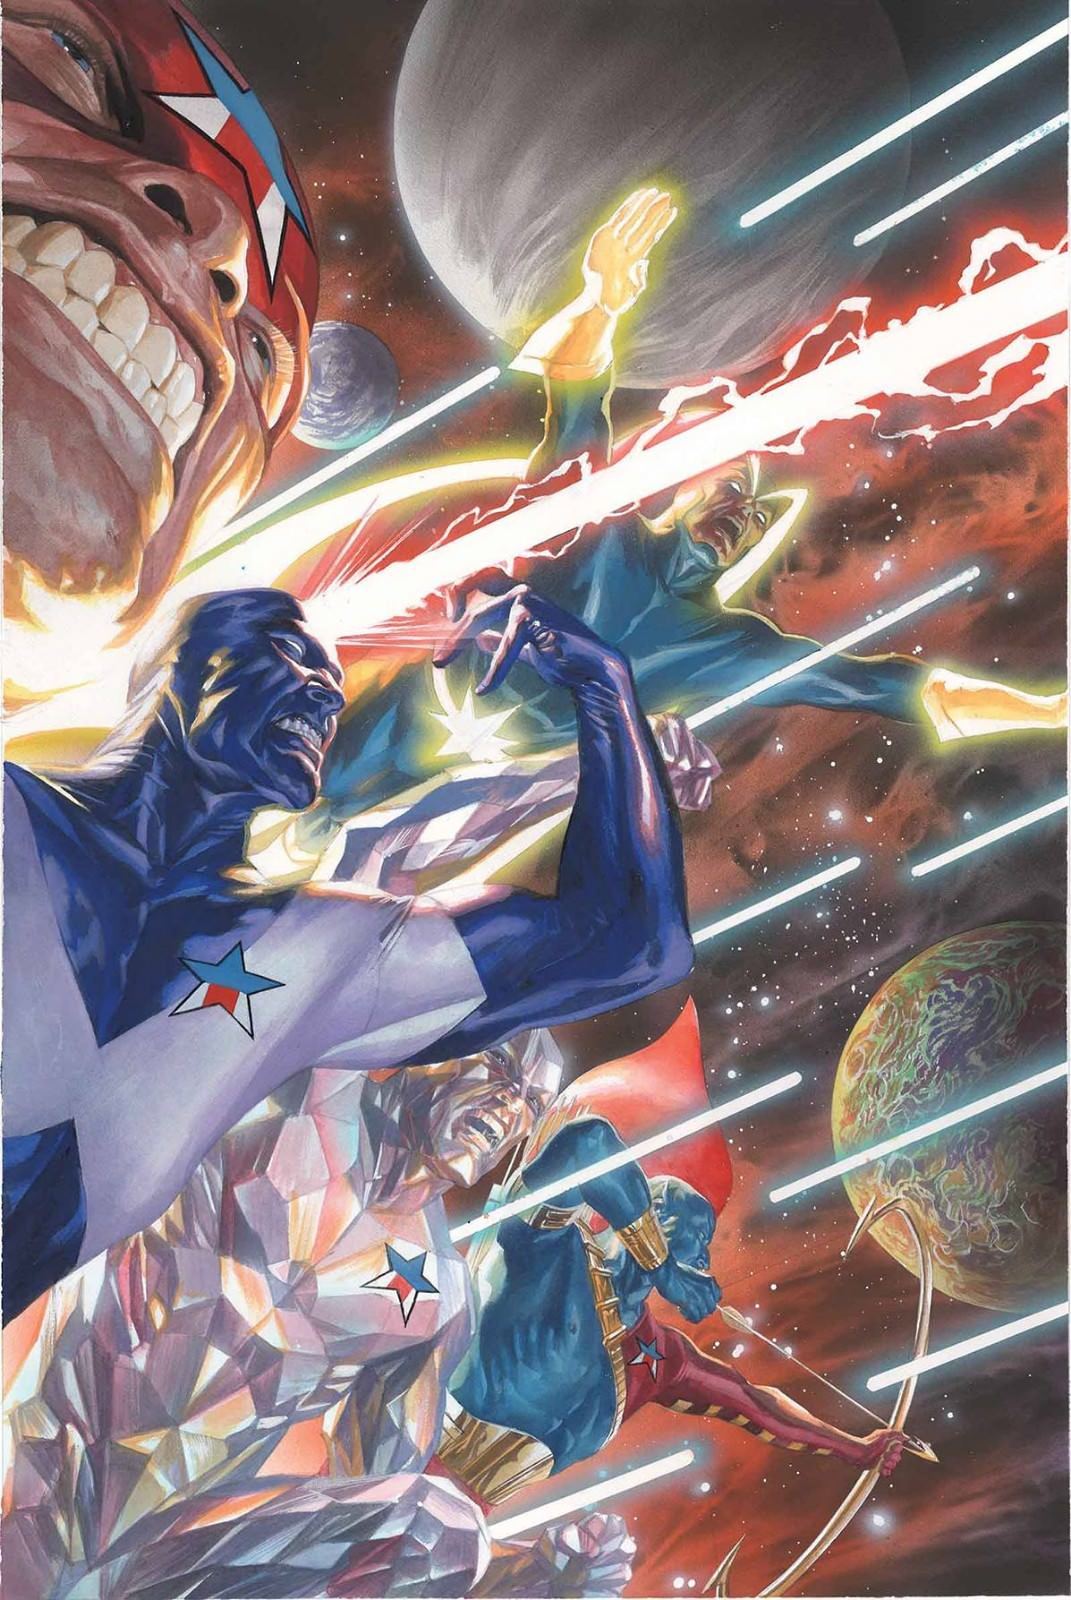 FULL SIZE POSTER GUARDIANS OF THE GALAXY POSTER  ALEX ROSS 24 x 36 inches 